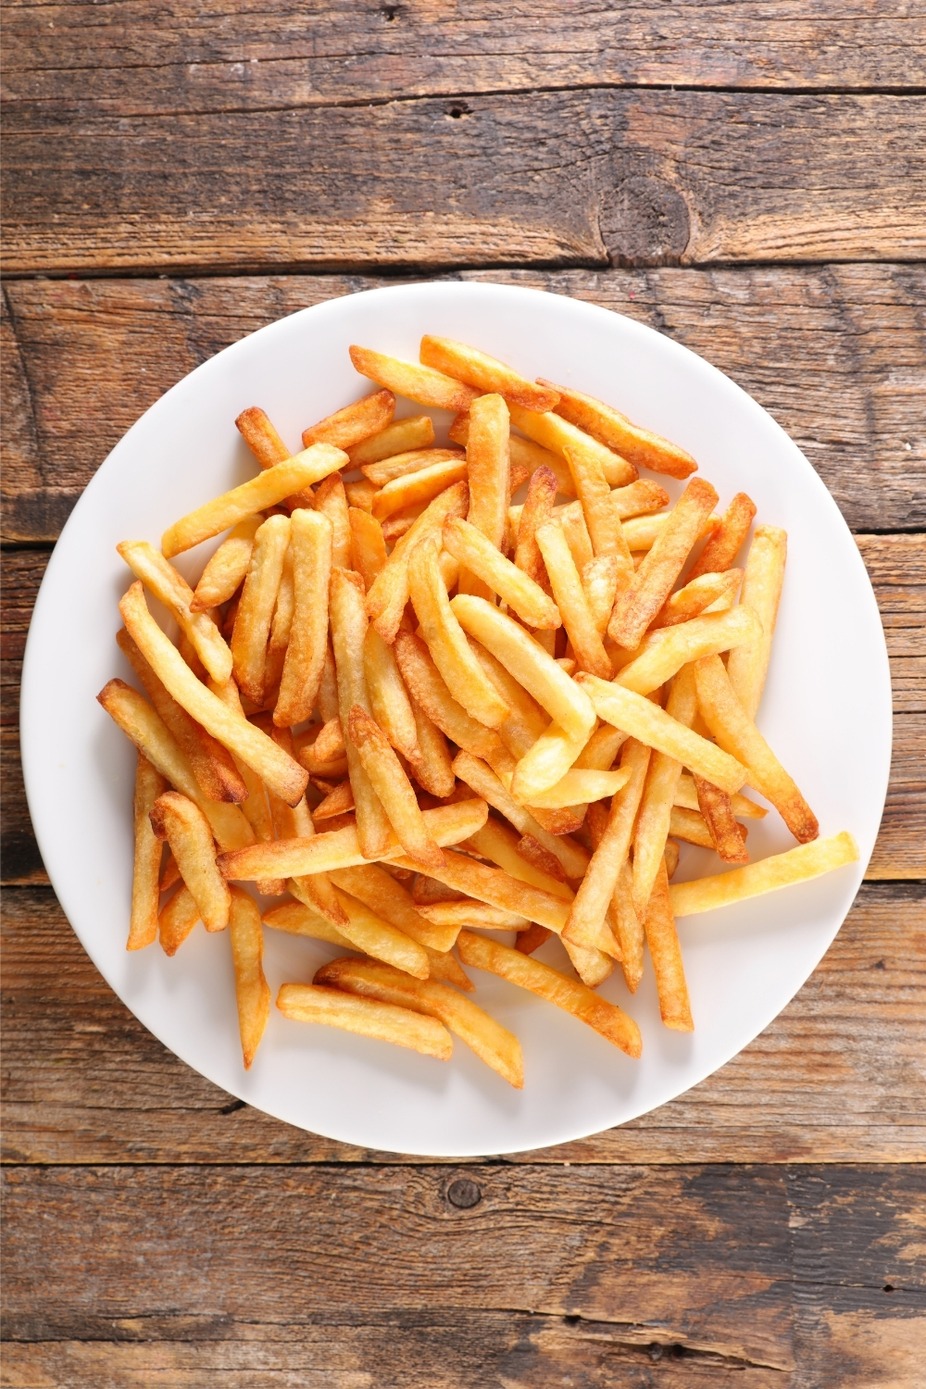 National French Fry Day event photo